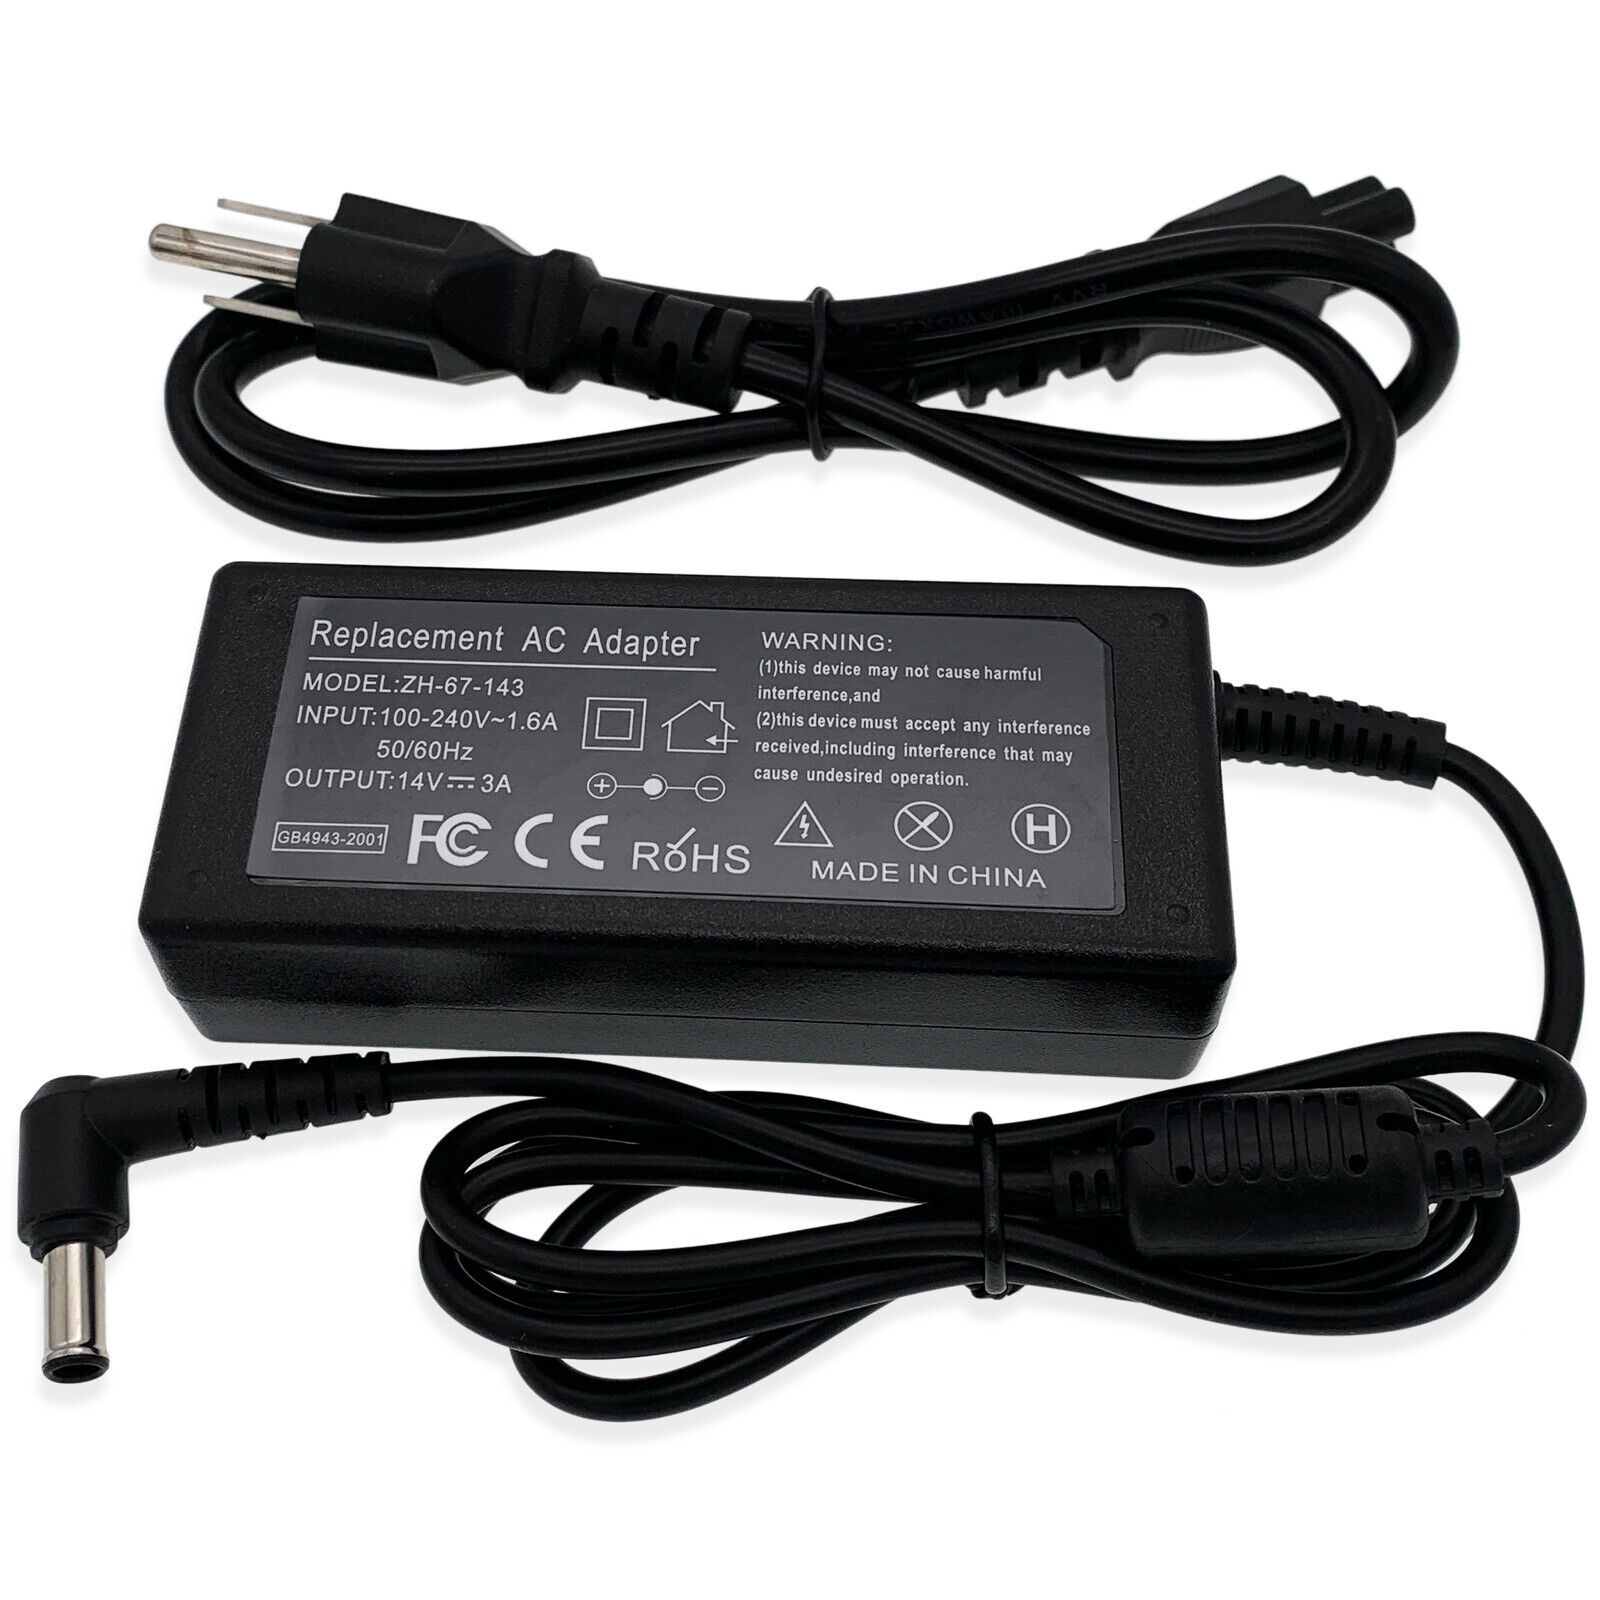 AC Adapter For Samsung C27F396FH C27F396FHN LC27F396FHNXZA Monitor Power Supply